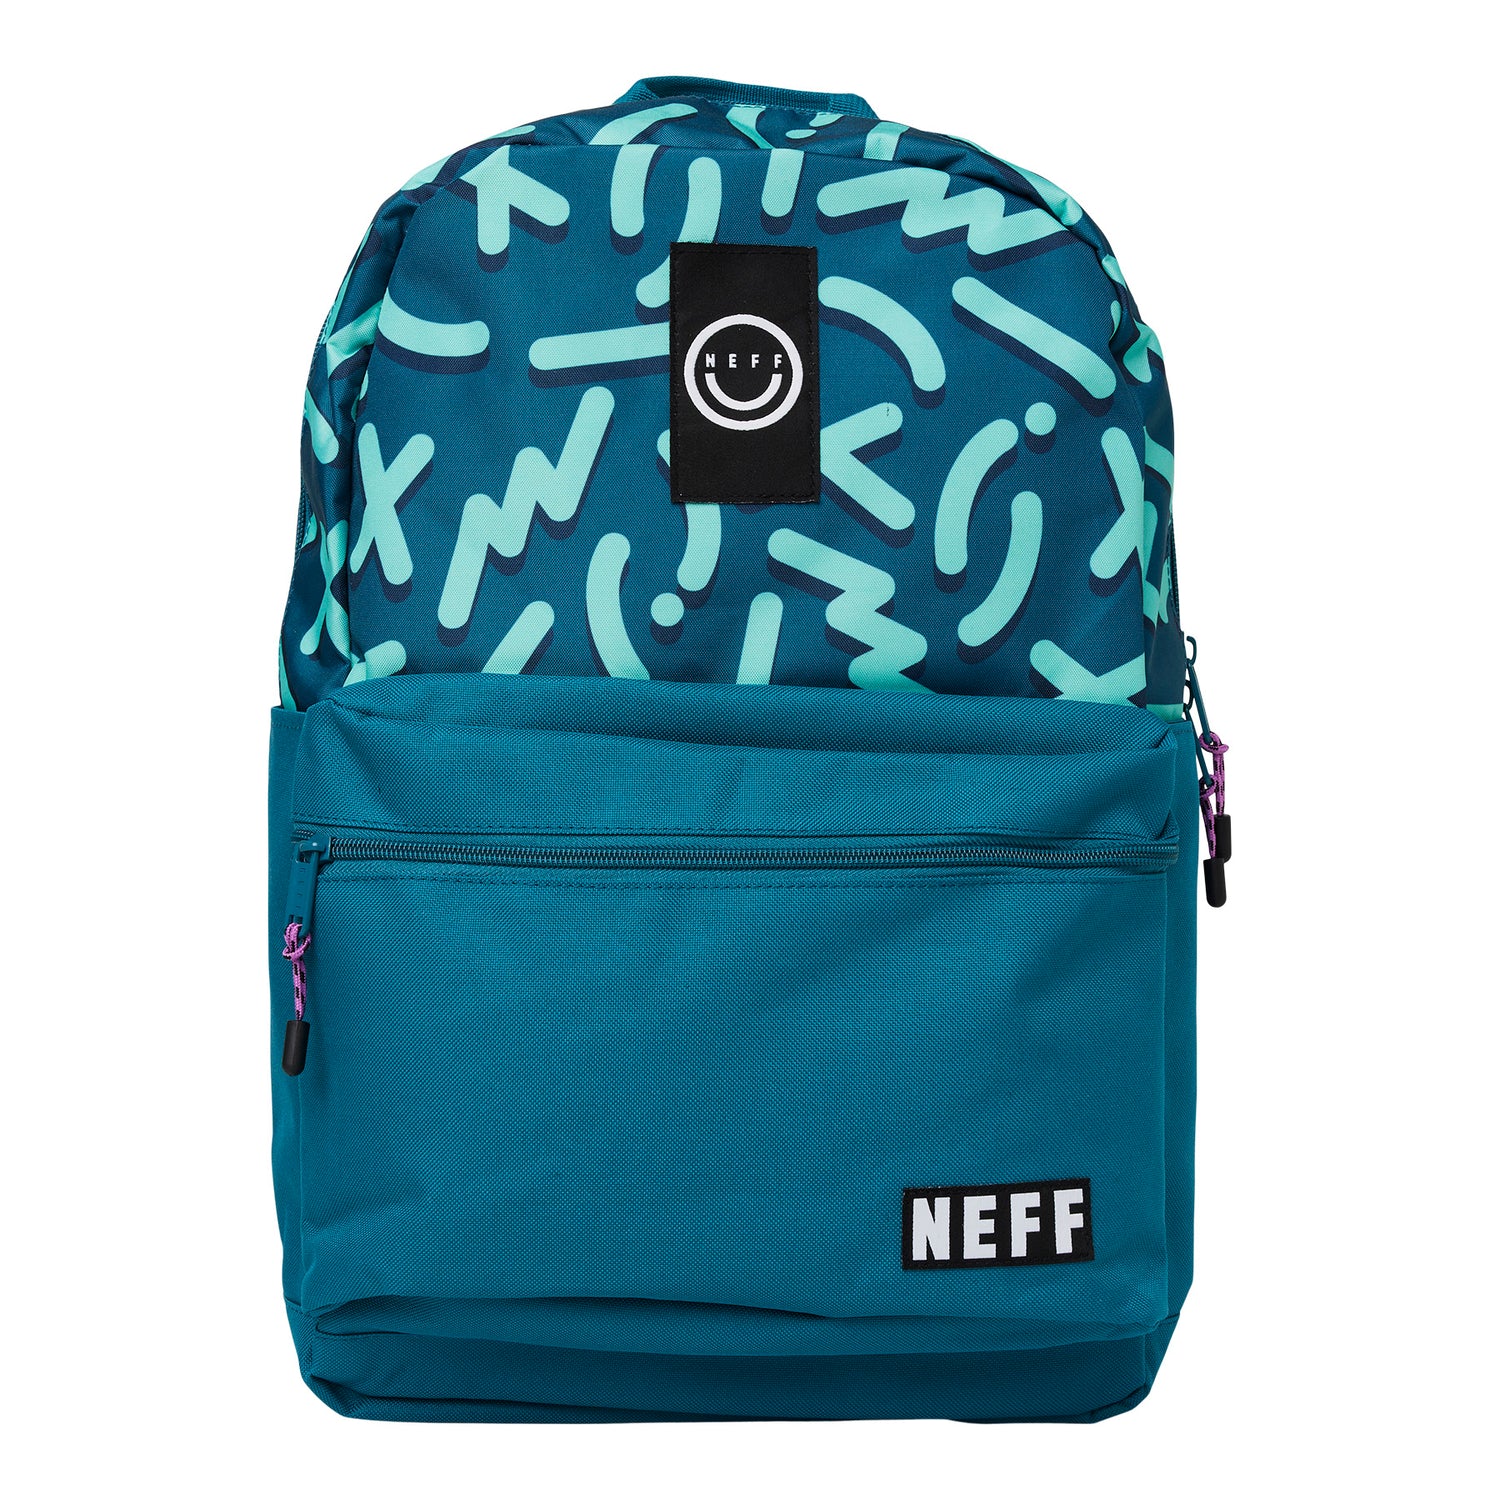 STRUCTURE BACKPACK - TEAL